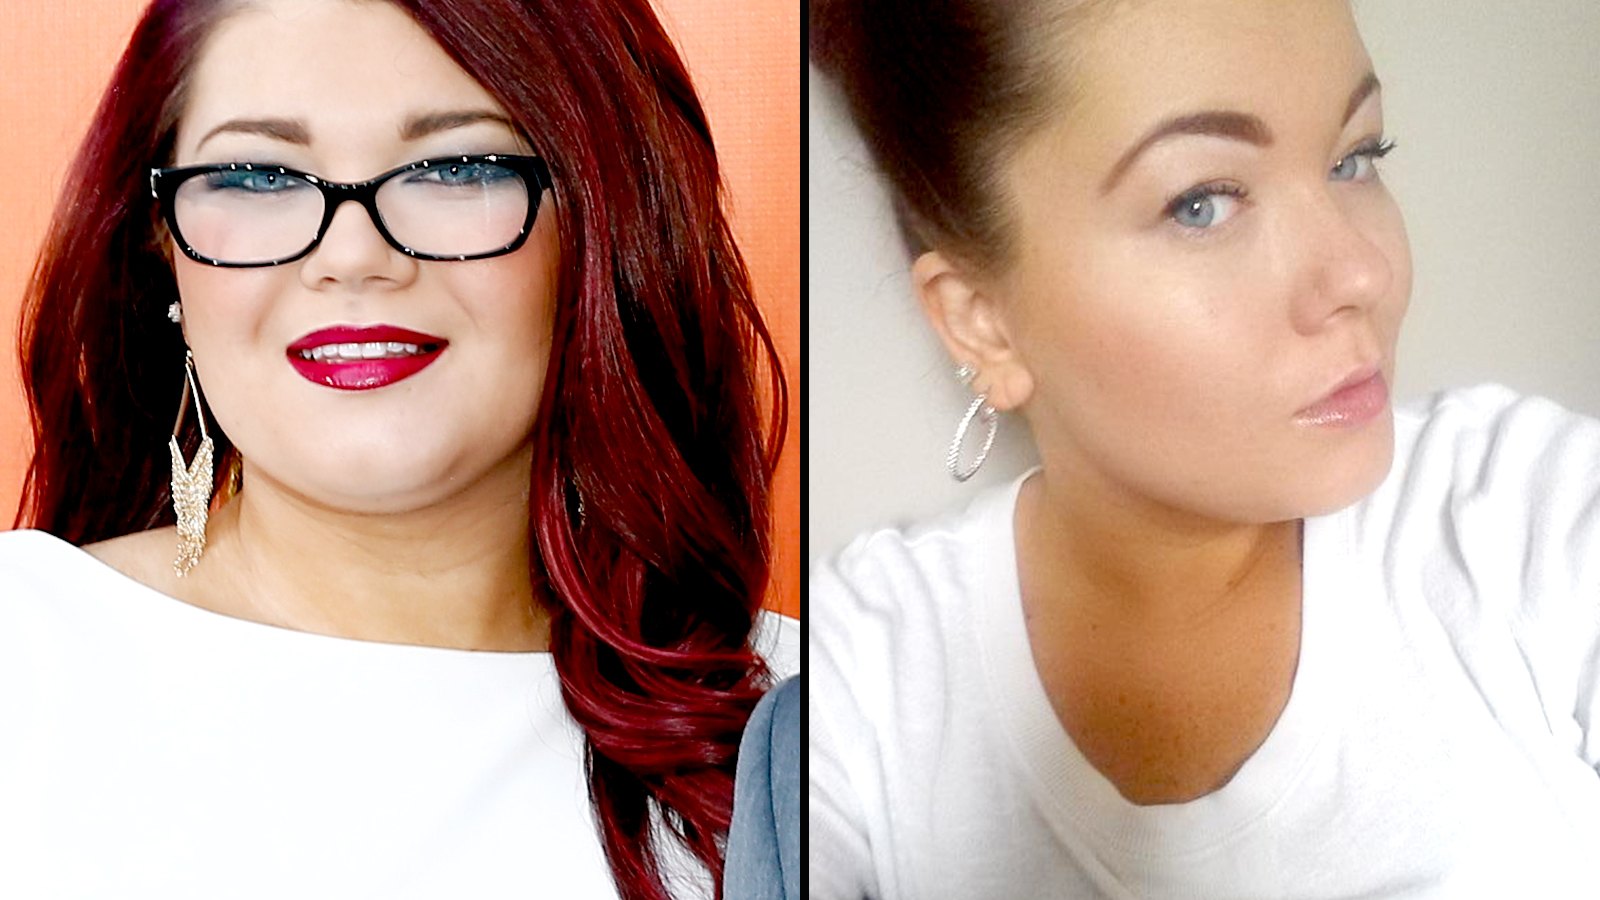 Amber Portwood lost 36 pounds